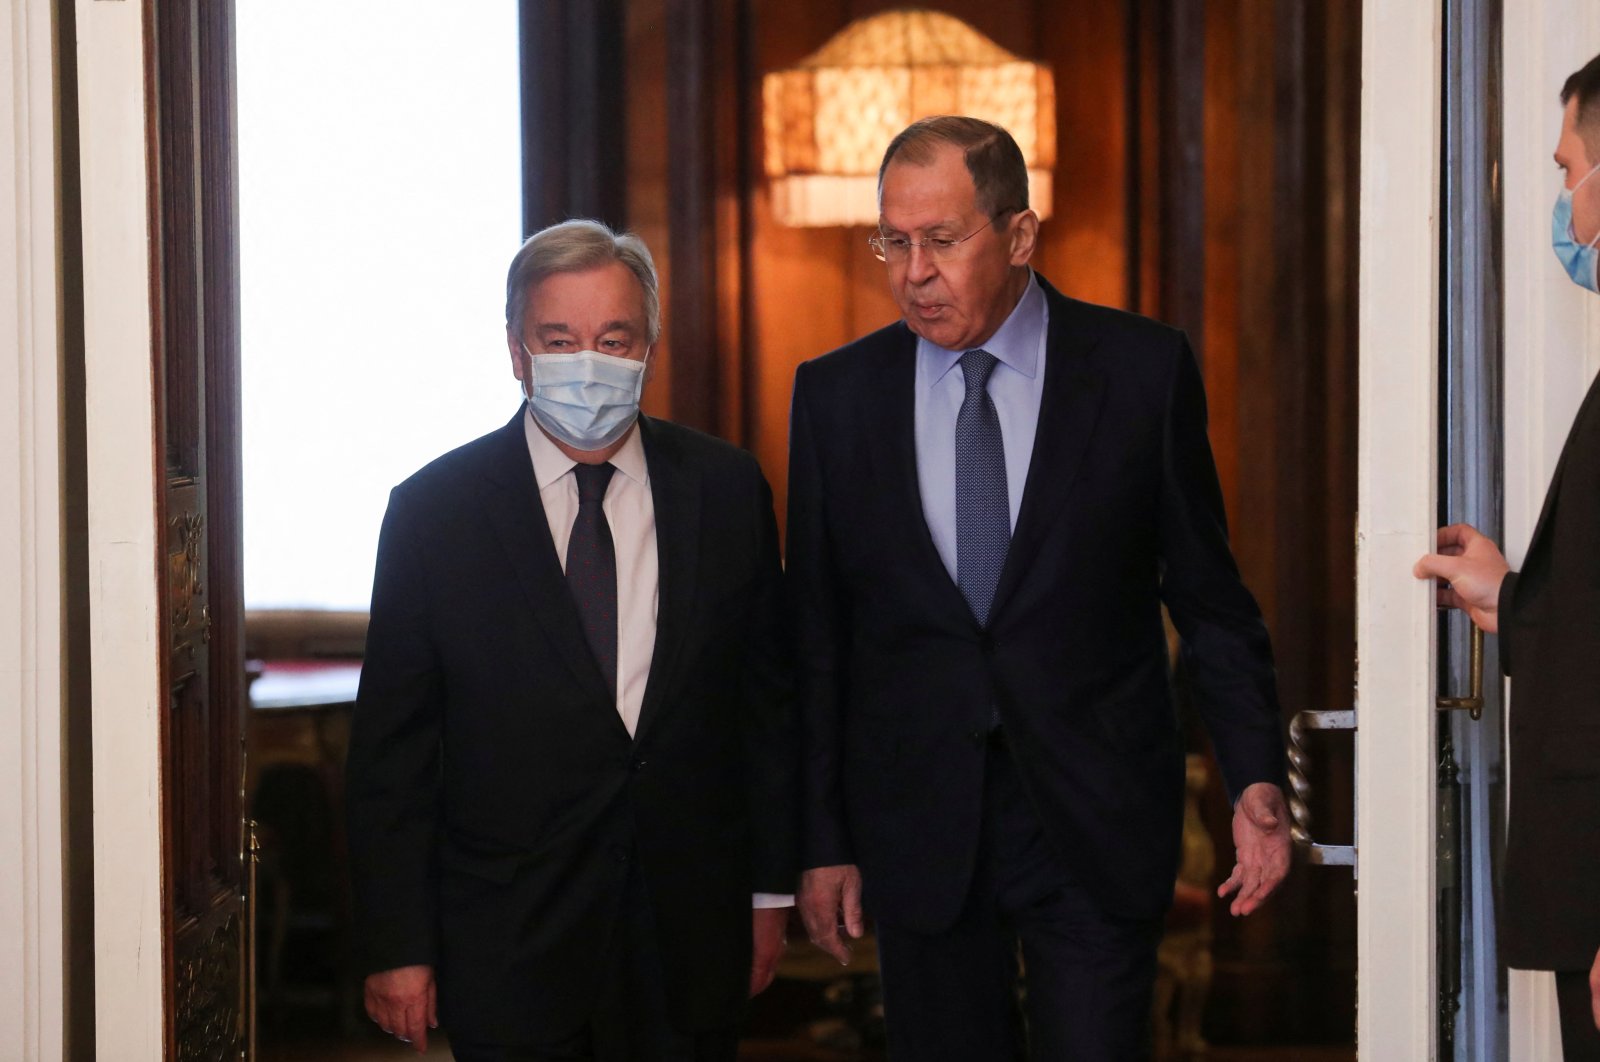 Russian Foreign Minister Sergey Lavrov and U.N. Secretary-General Antonio Guterres meet in Moscow, Russia, April 26, 2022. (Reuters Photo)